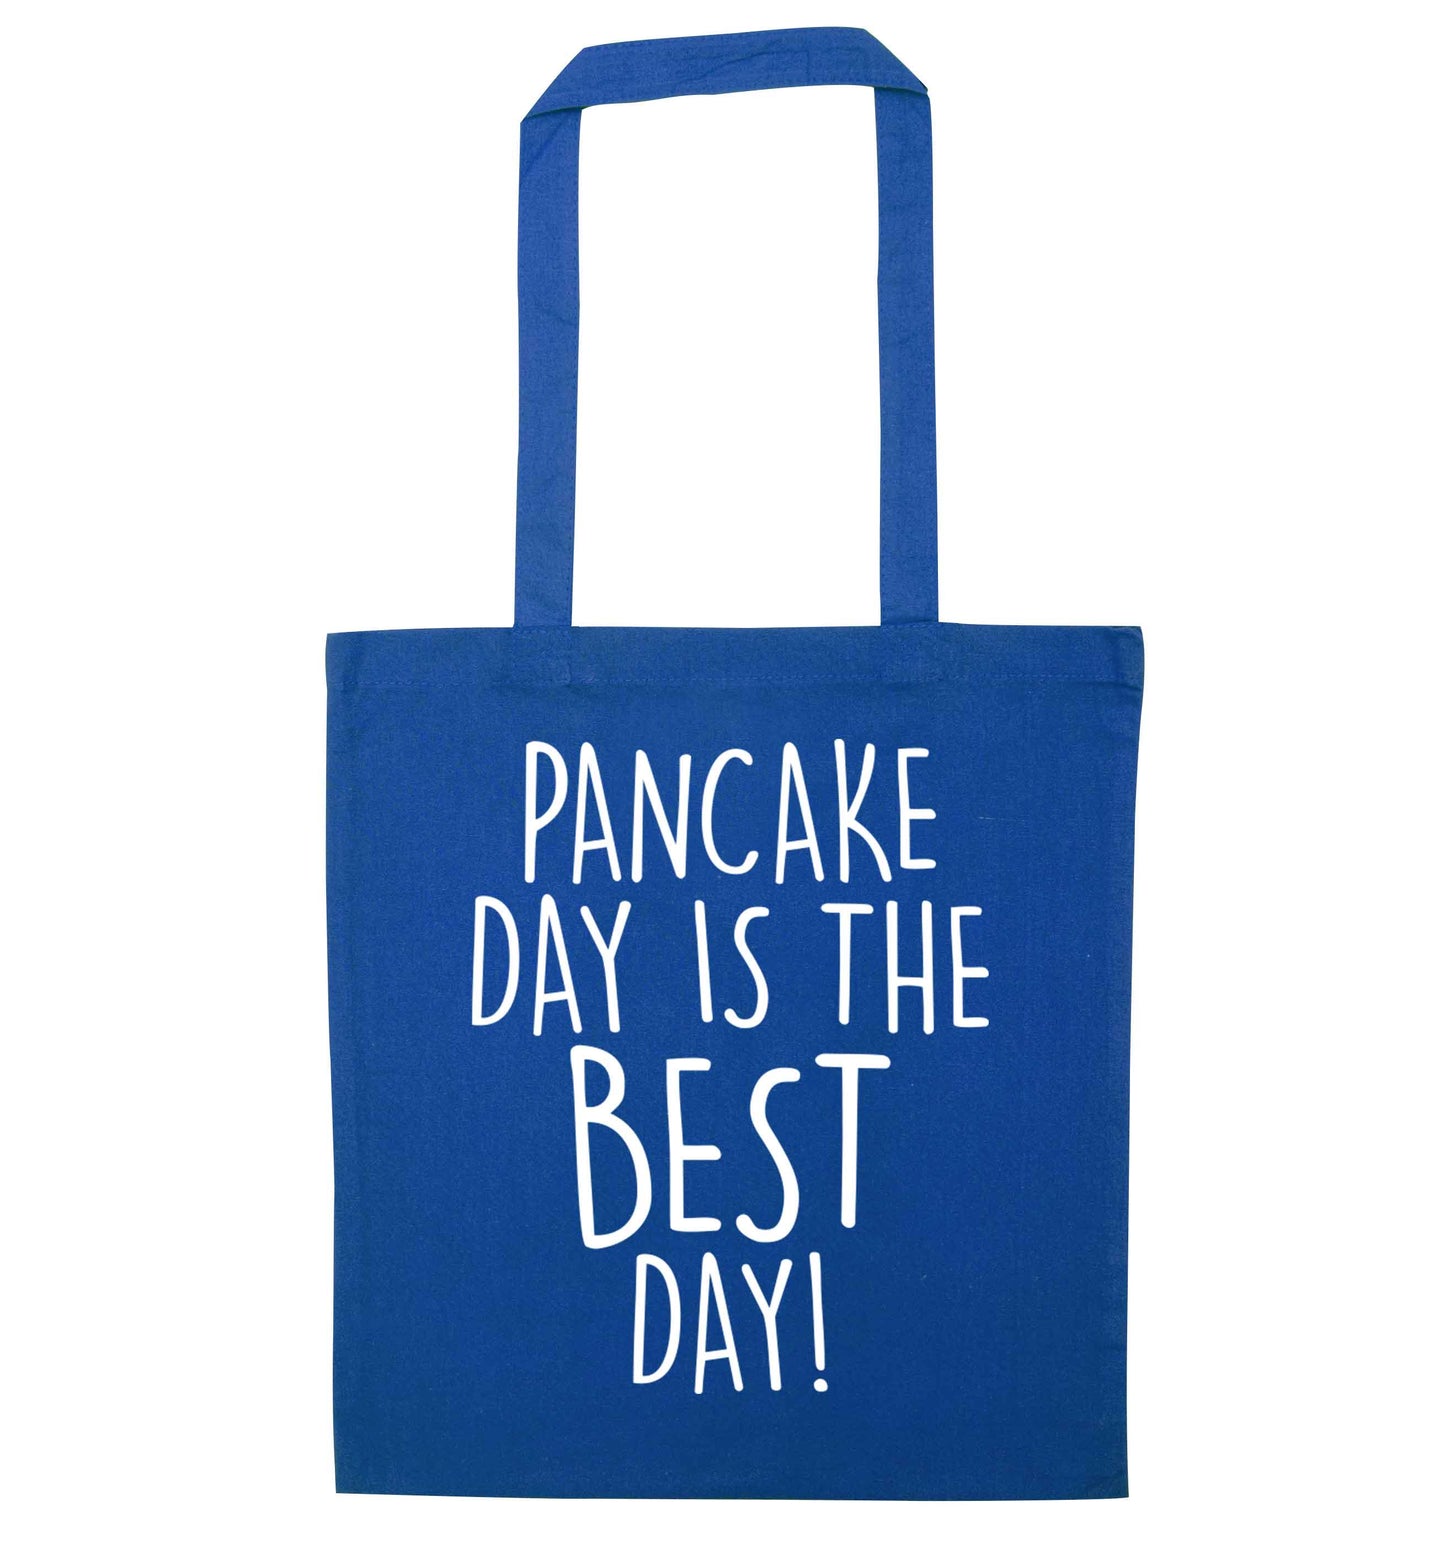 Pancake day is the best day blue tote bag